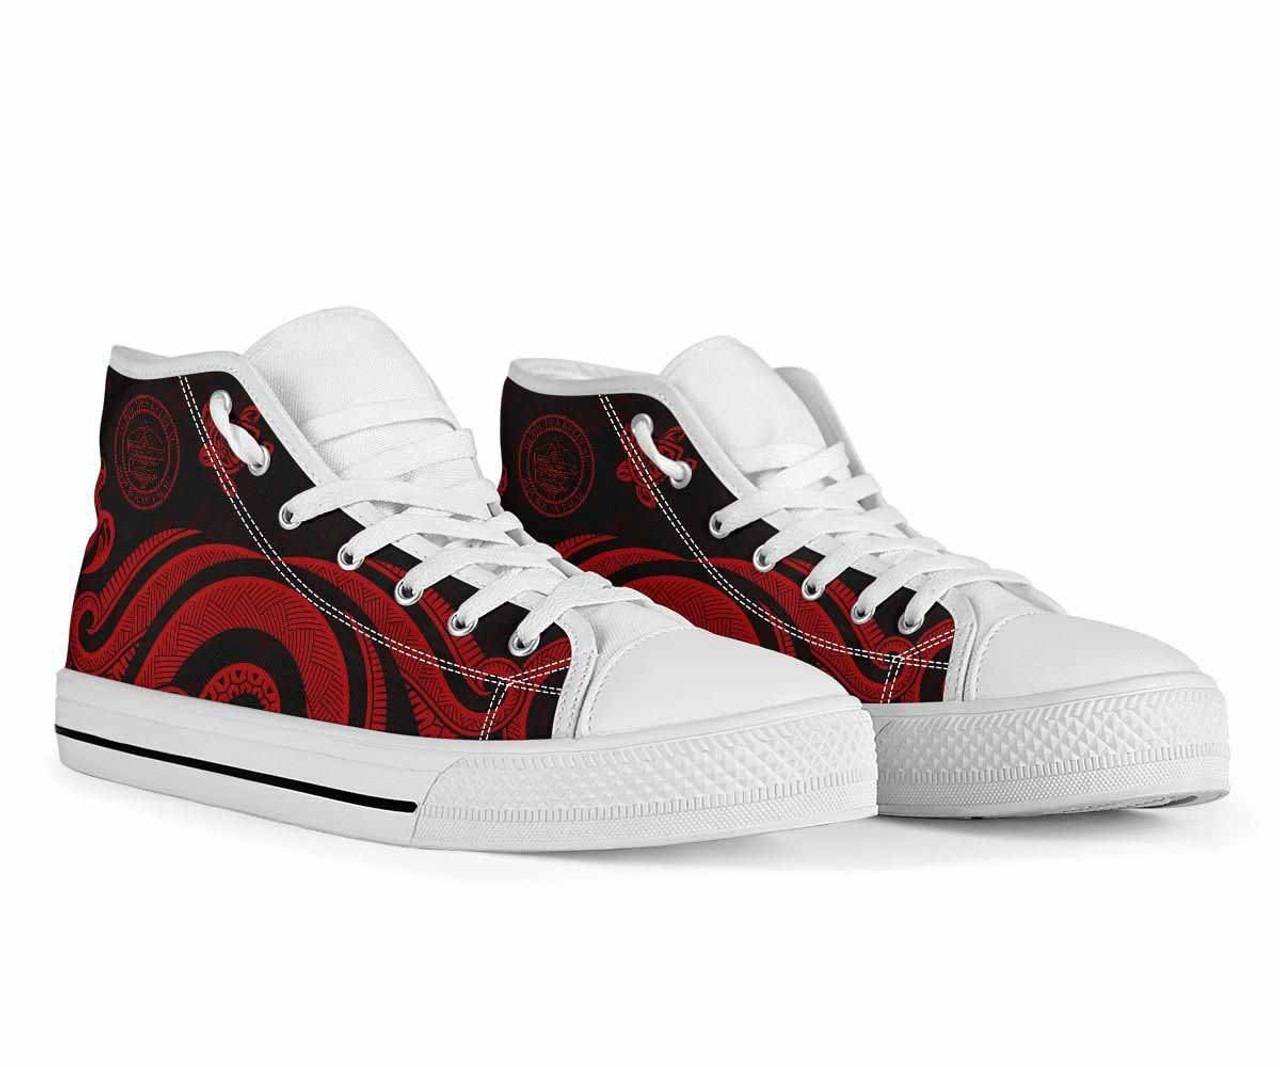 Palau High Top Canvas Shoes - Red Tentacle Turtle 7